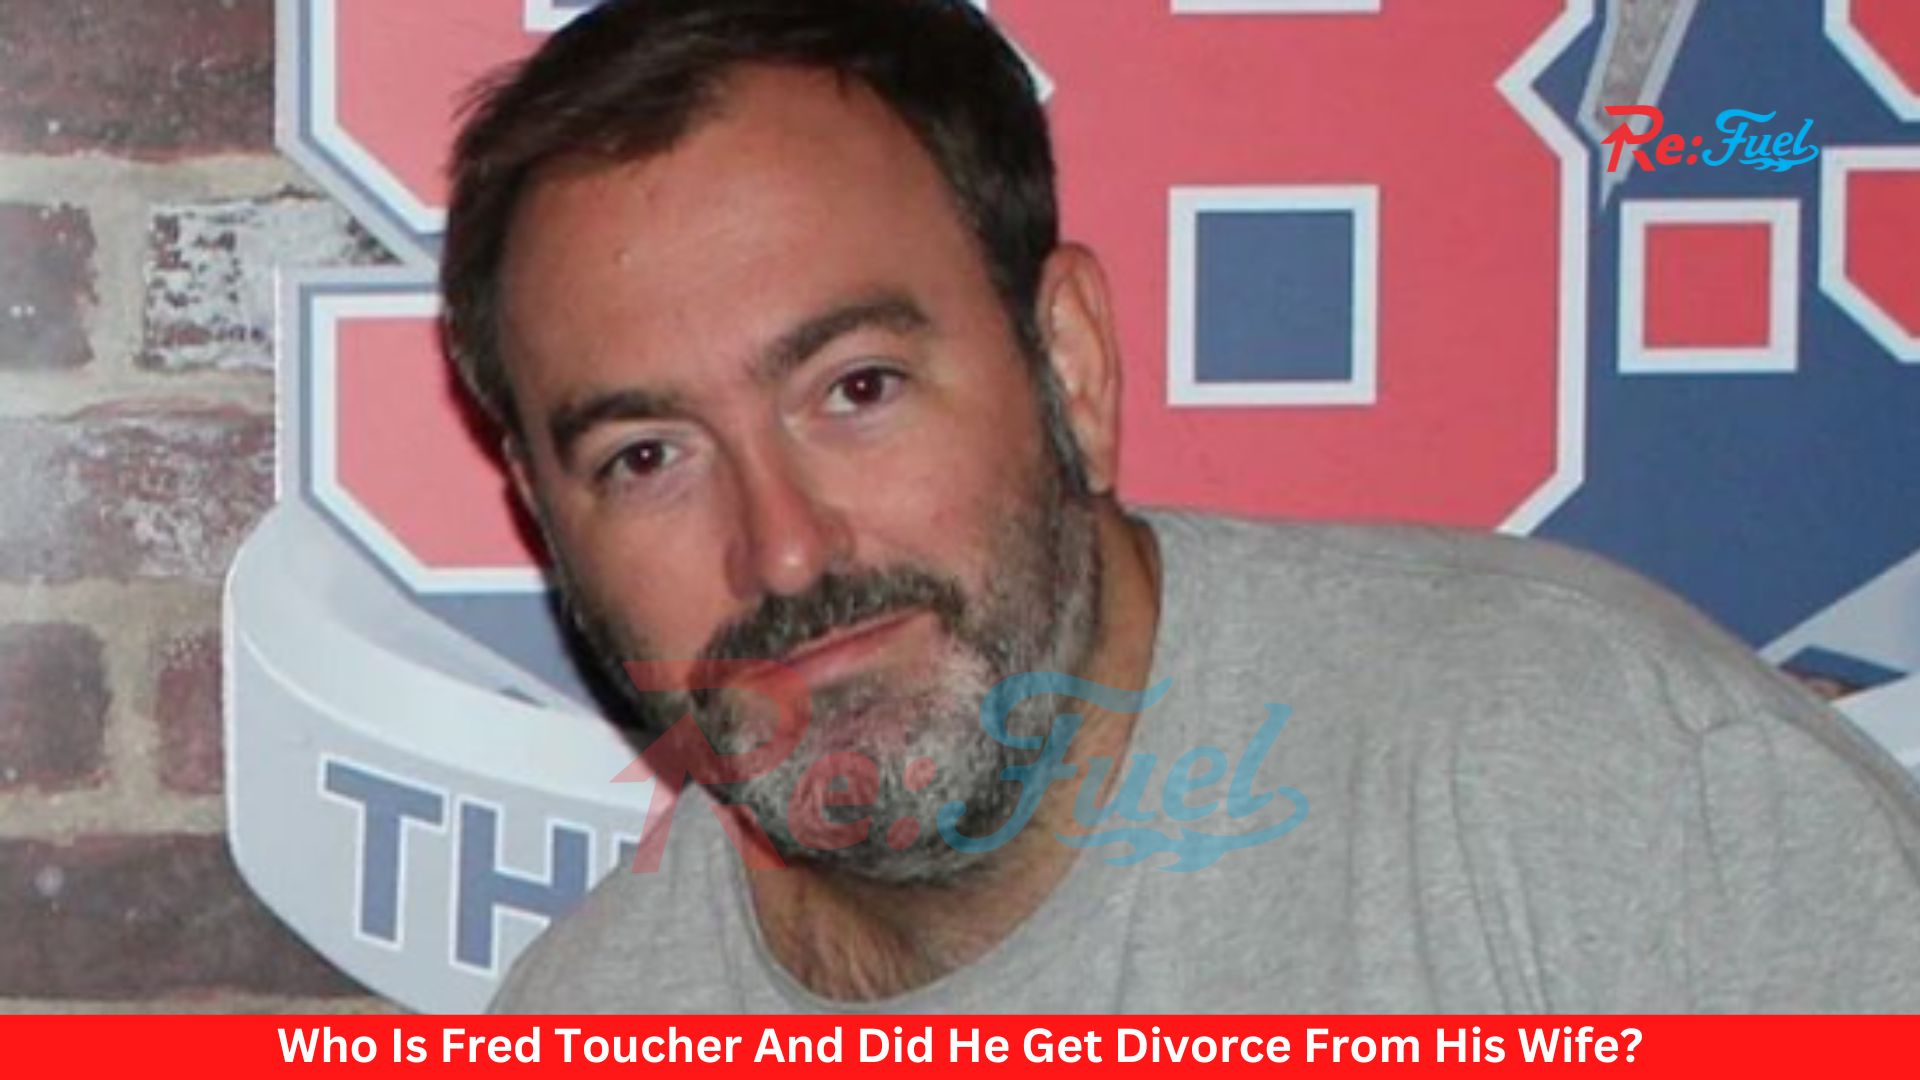 Who Is Fred Toucher And Did He Get Divorce From His Wife?